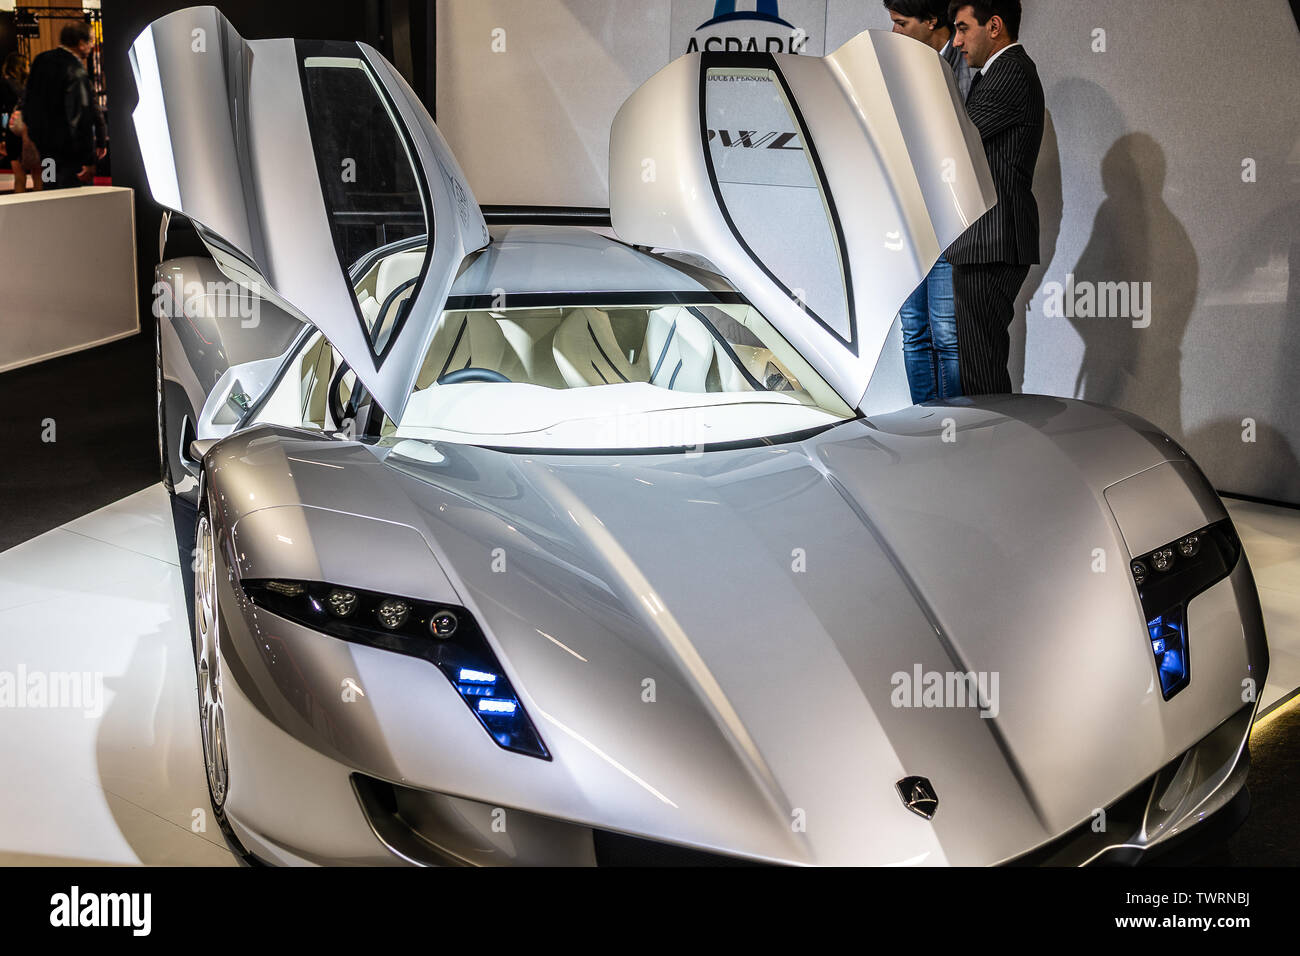 Paris, France, October 04, 2018: Aspark Owl at Mondial Paris Motor Show, all-electric battery-powered sports car manufactured by Japanese Aspark Stock Photo